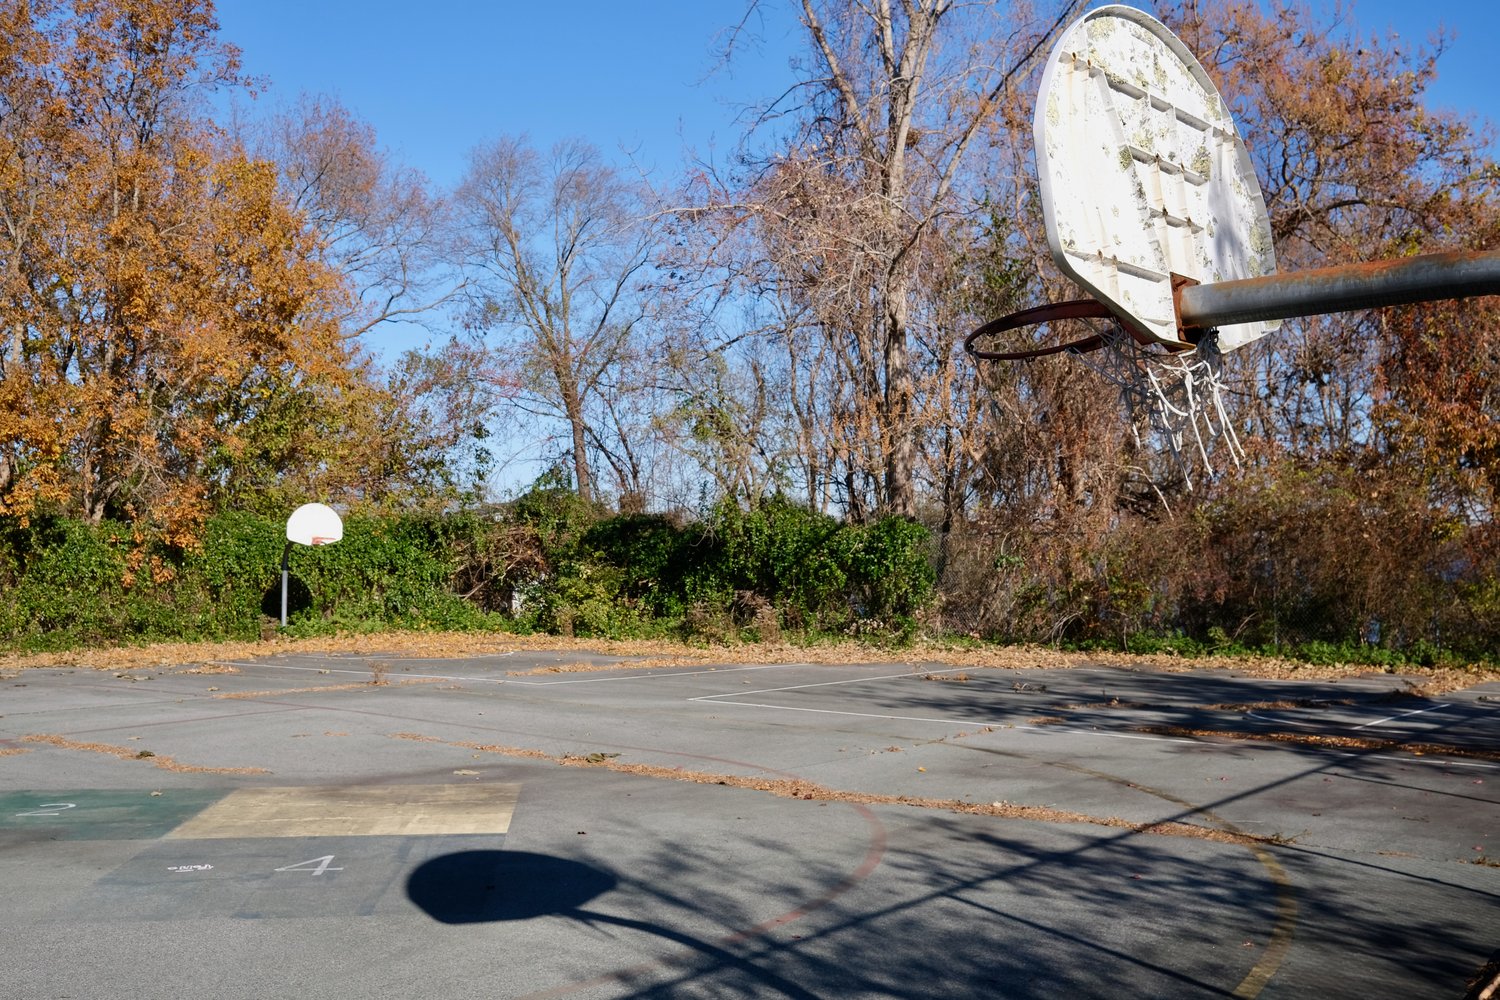 These abandoned basketball courts at Elmhurst Park will be developed into four new pickleball courts if the Town of Portsmouth wins a matching state recreation development grant.